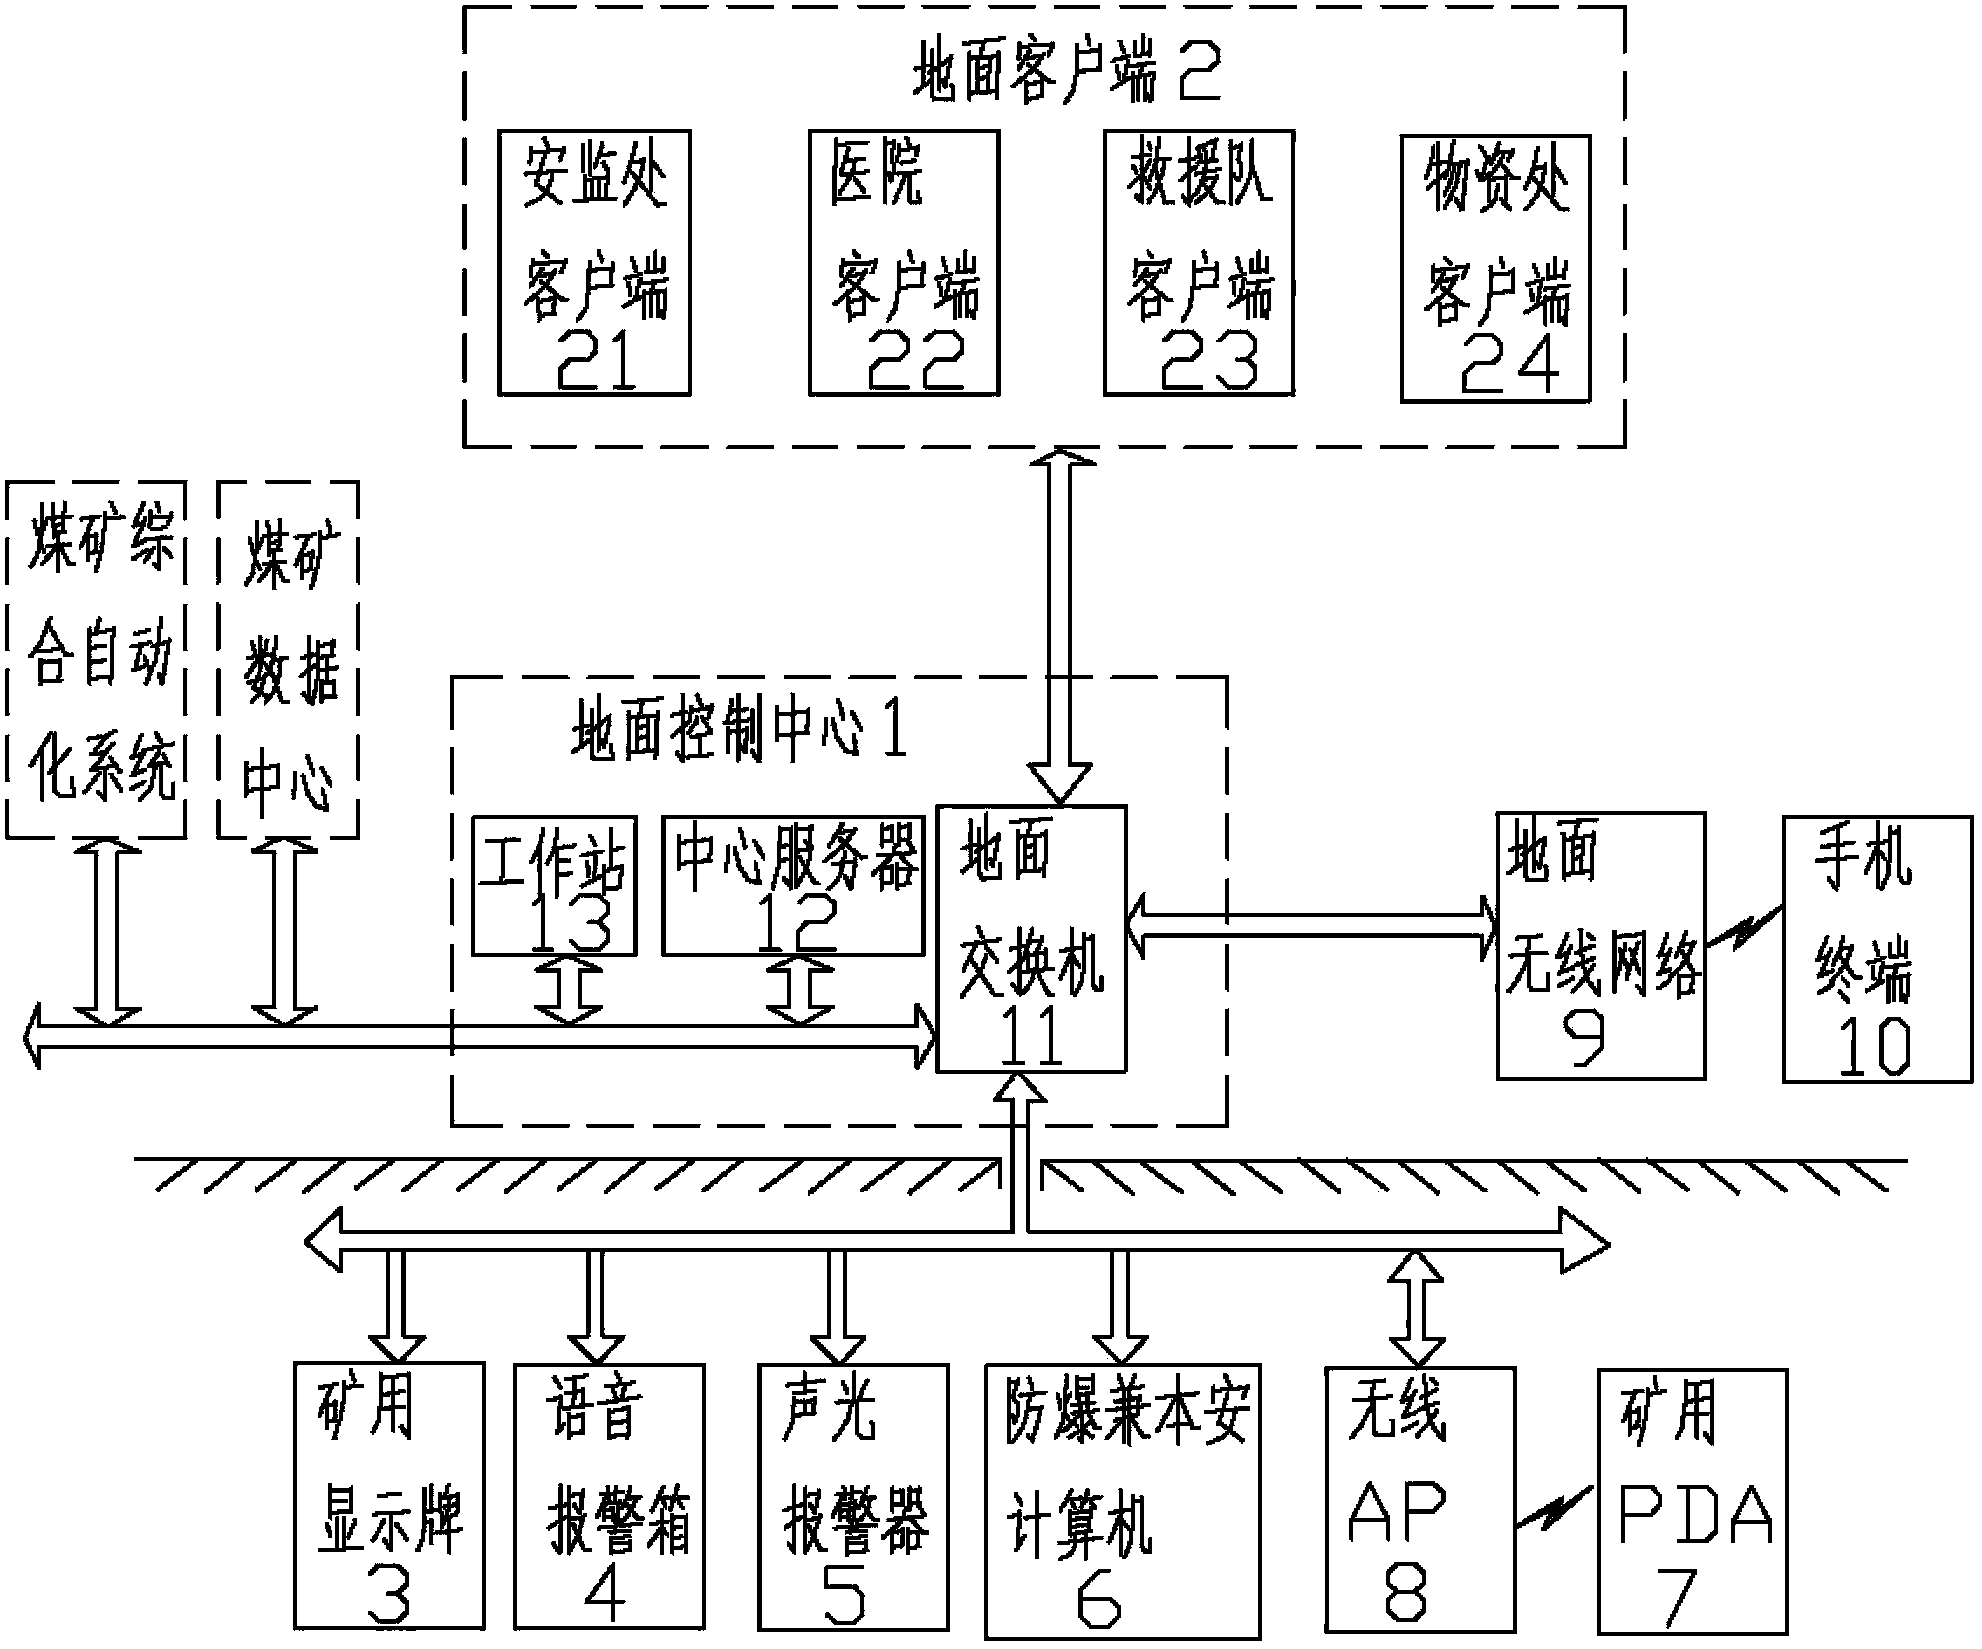 Coal mine multimedia comprehensive information issuing system